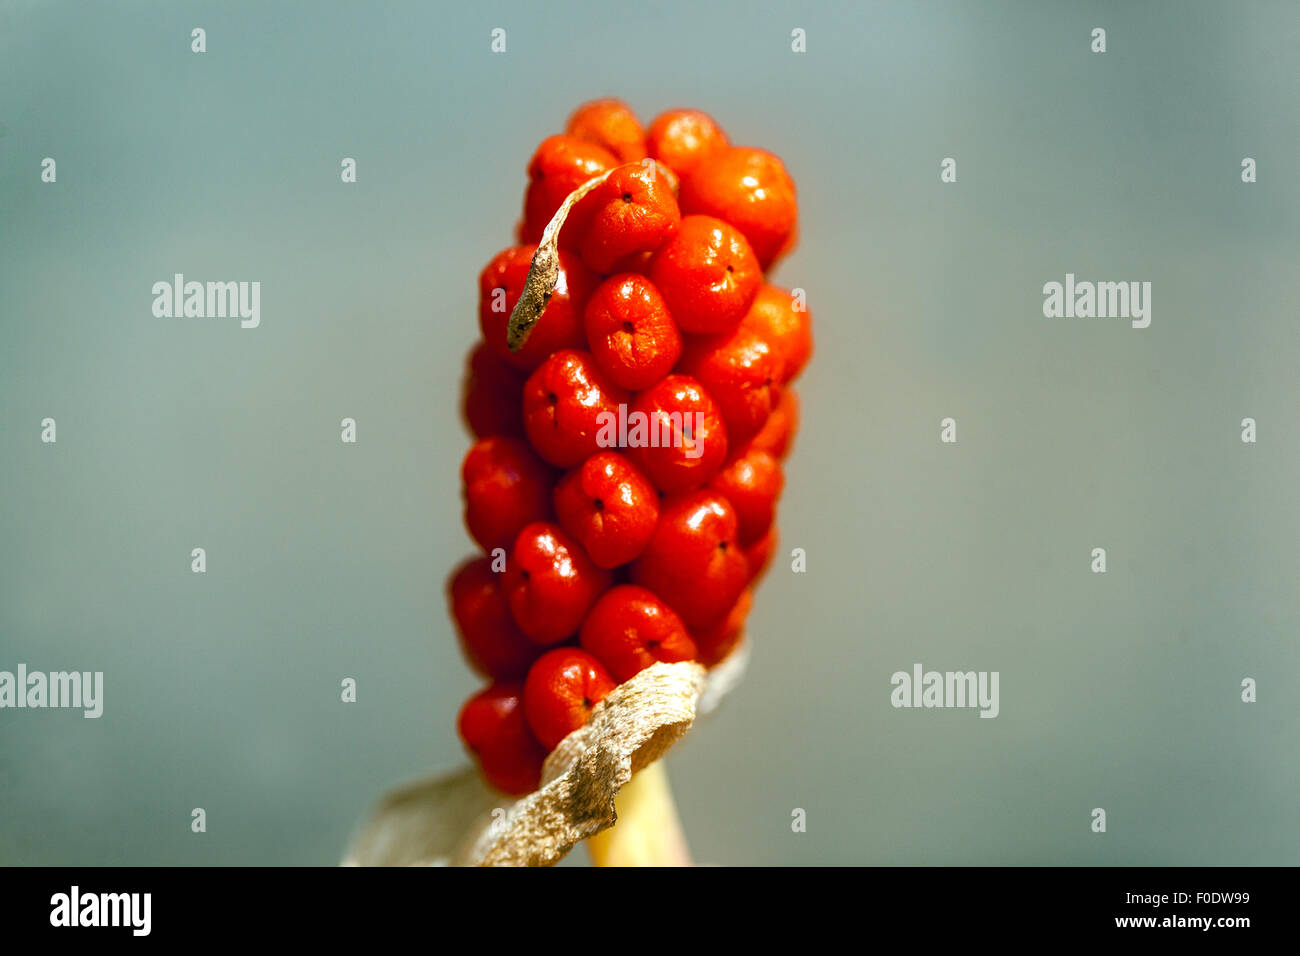 Cuckoo Pint or Lords and Ladies - Arum maculatum - poisonous berries Stock Photo